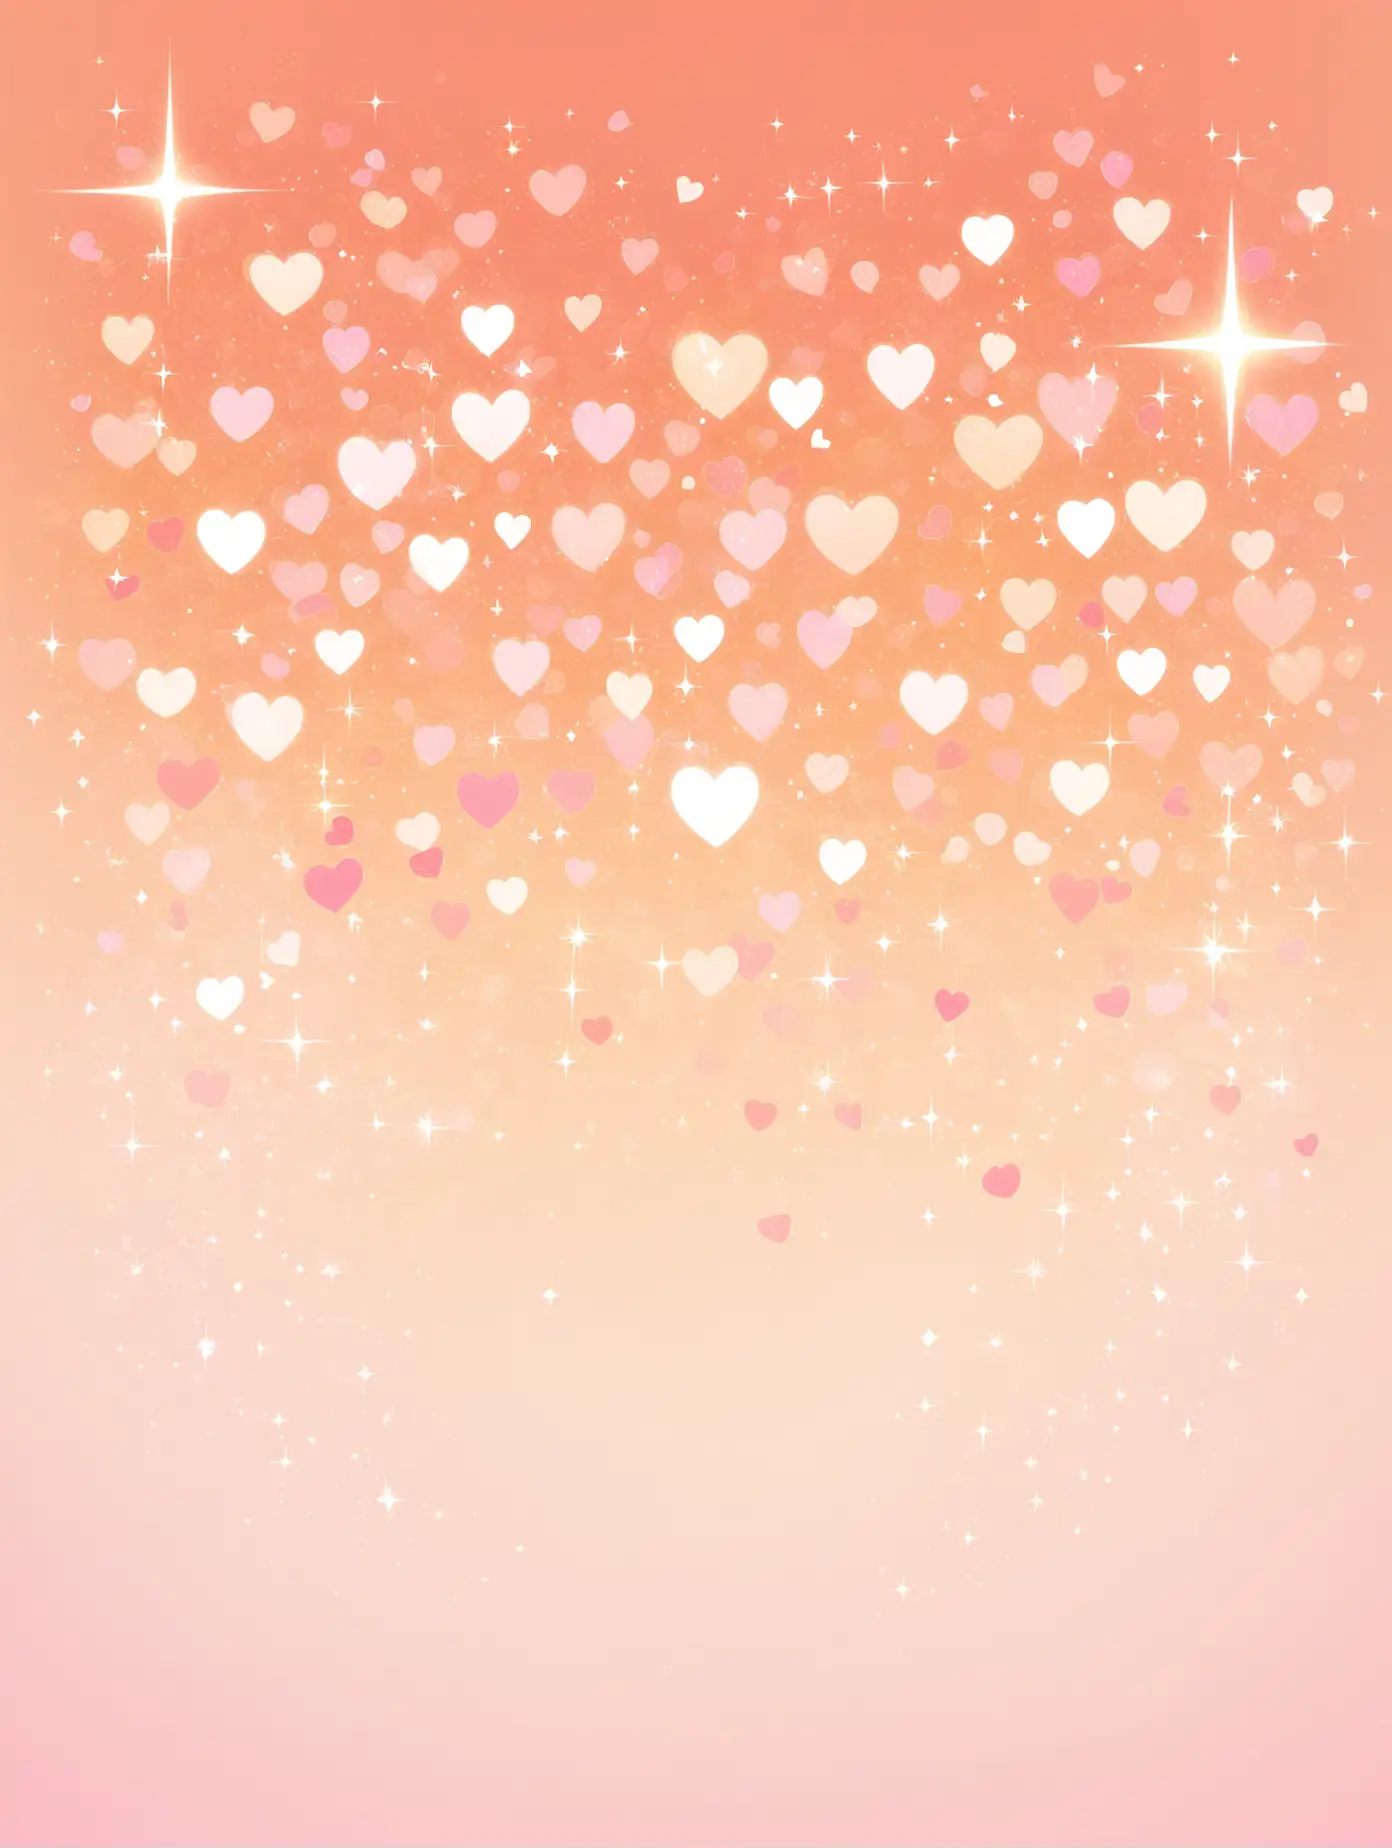 Minimalist-Romantic-Background-with-Soft-Orange-and-Pink-Tones-and-Sparkling-Hearts